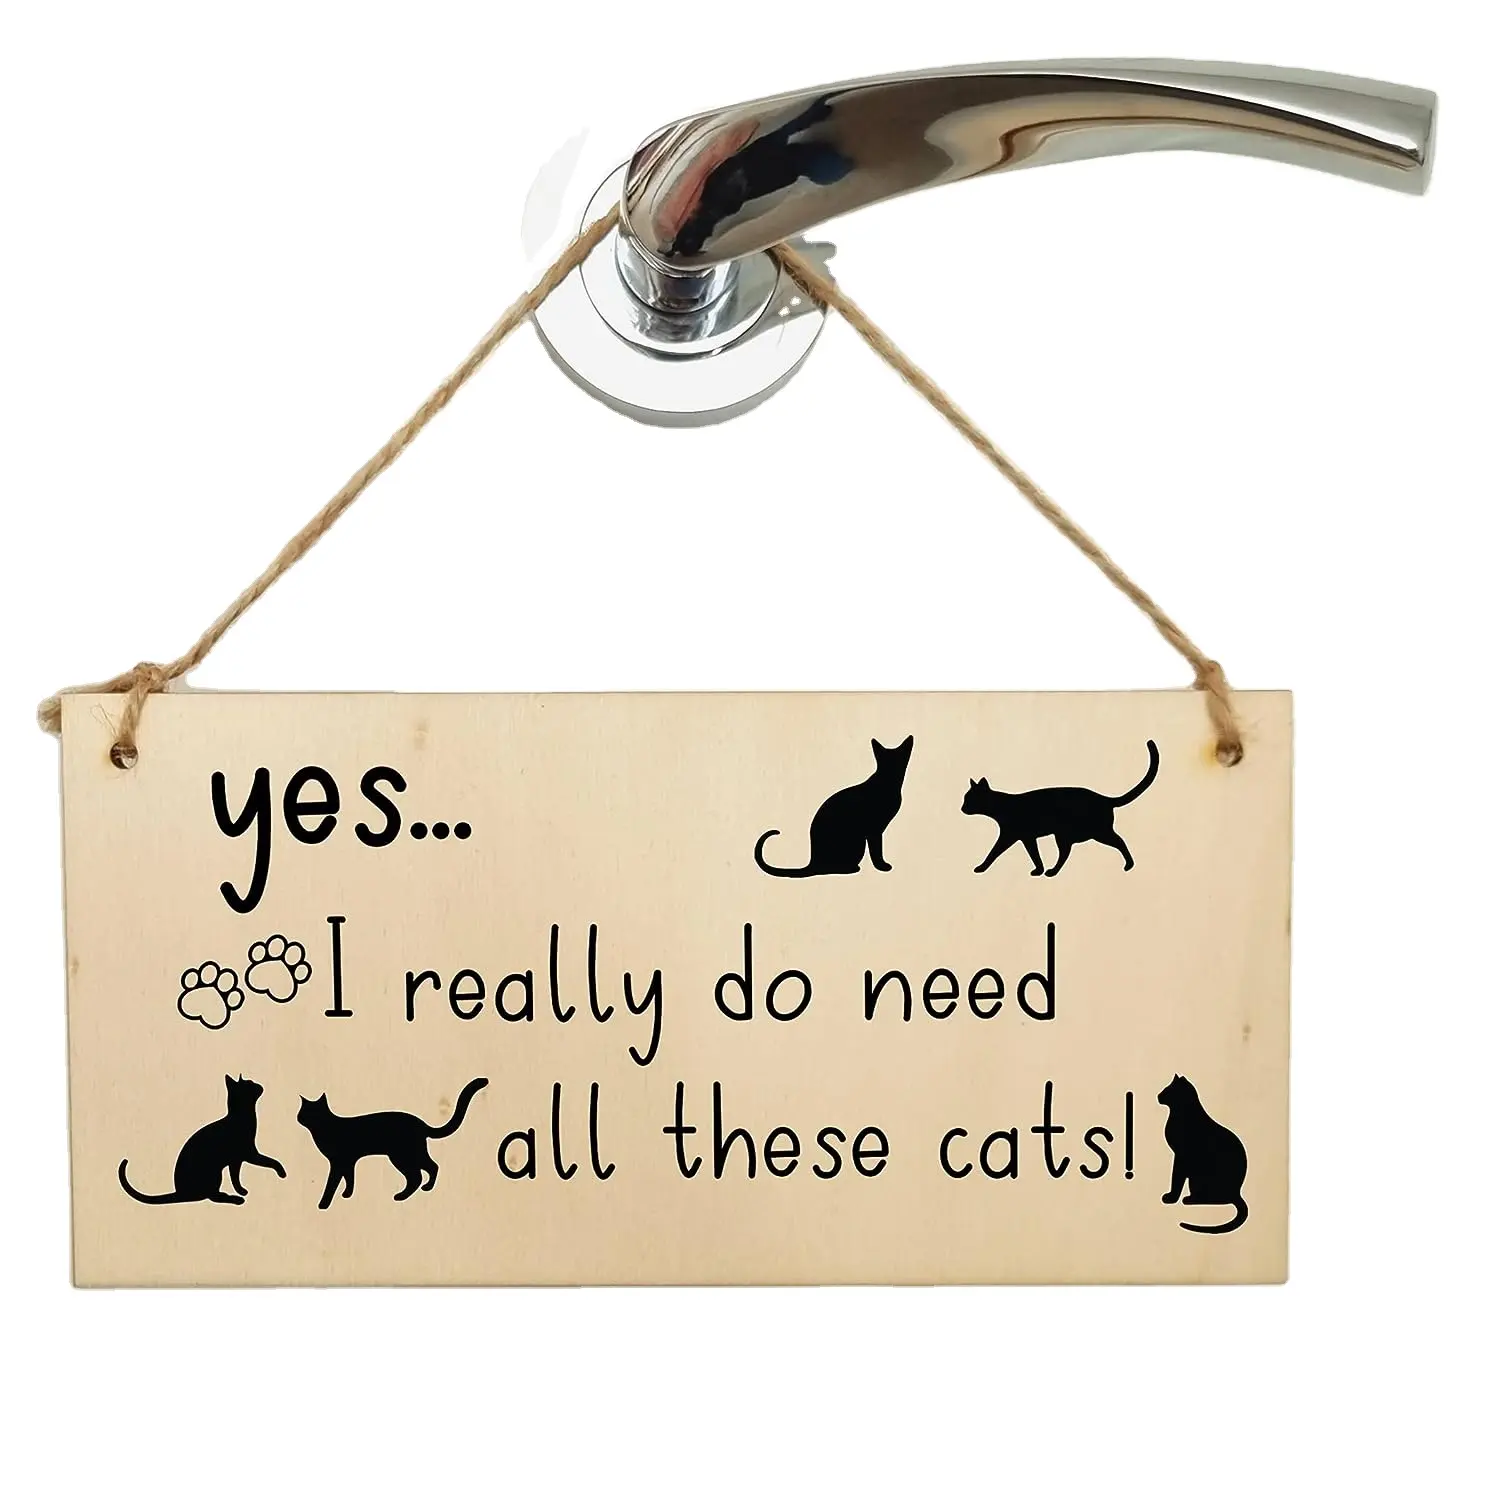 Handmade Wooden Hanging Wall sign wood Plaque Funny Sign for Pet Lover Cat Mum Dad home decor